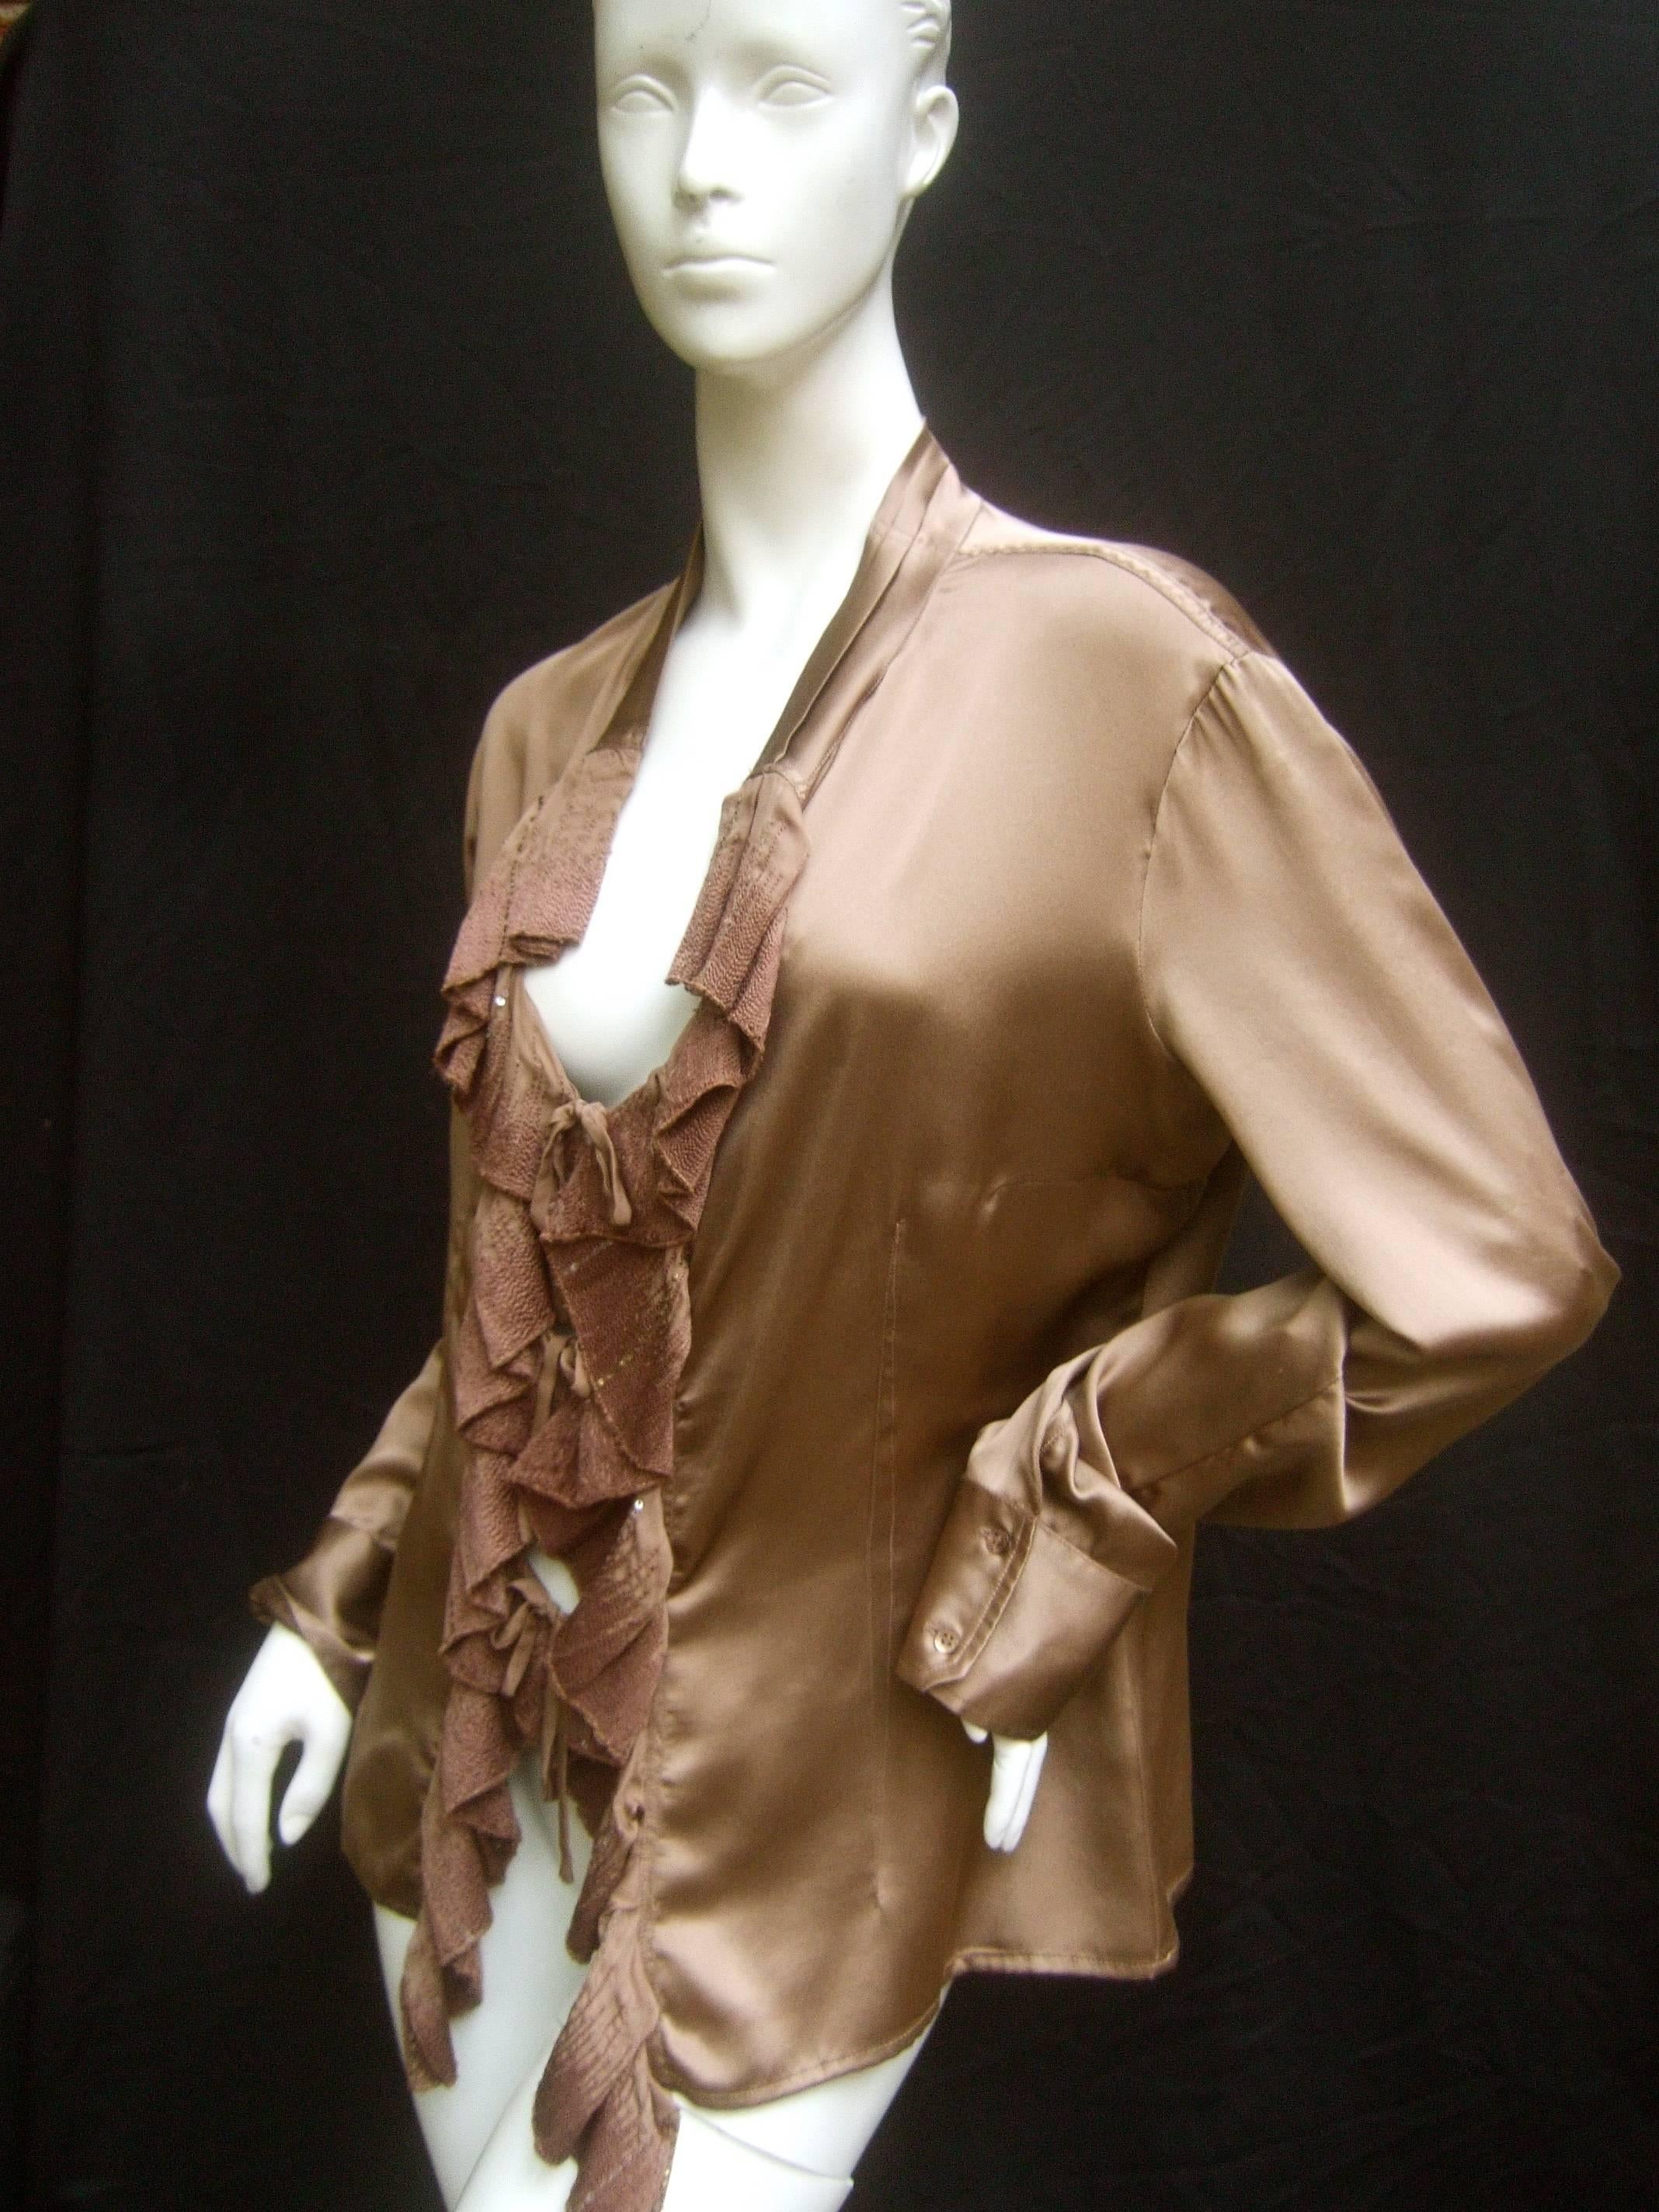 Roberto Cavalli Bronze silk charmeuse ruffled blouse 
The high fashion Italian blouse is designed with luminous 
mocha brown silk

The front is accented with cascading ruffles with
subtle brown embroidery and restrained sequins
The loose